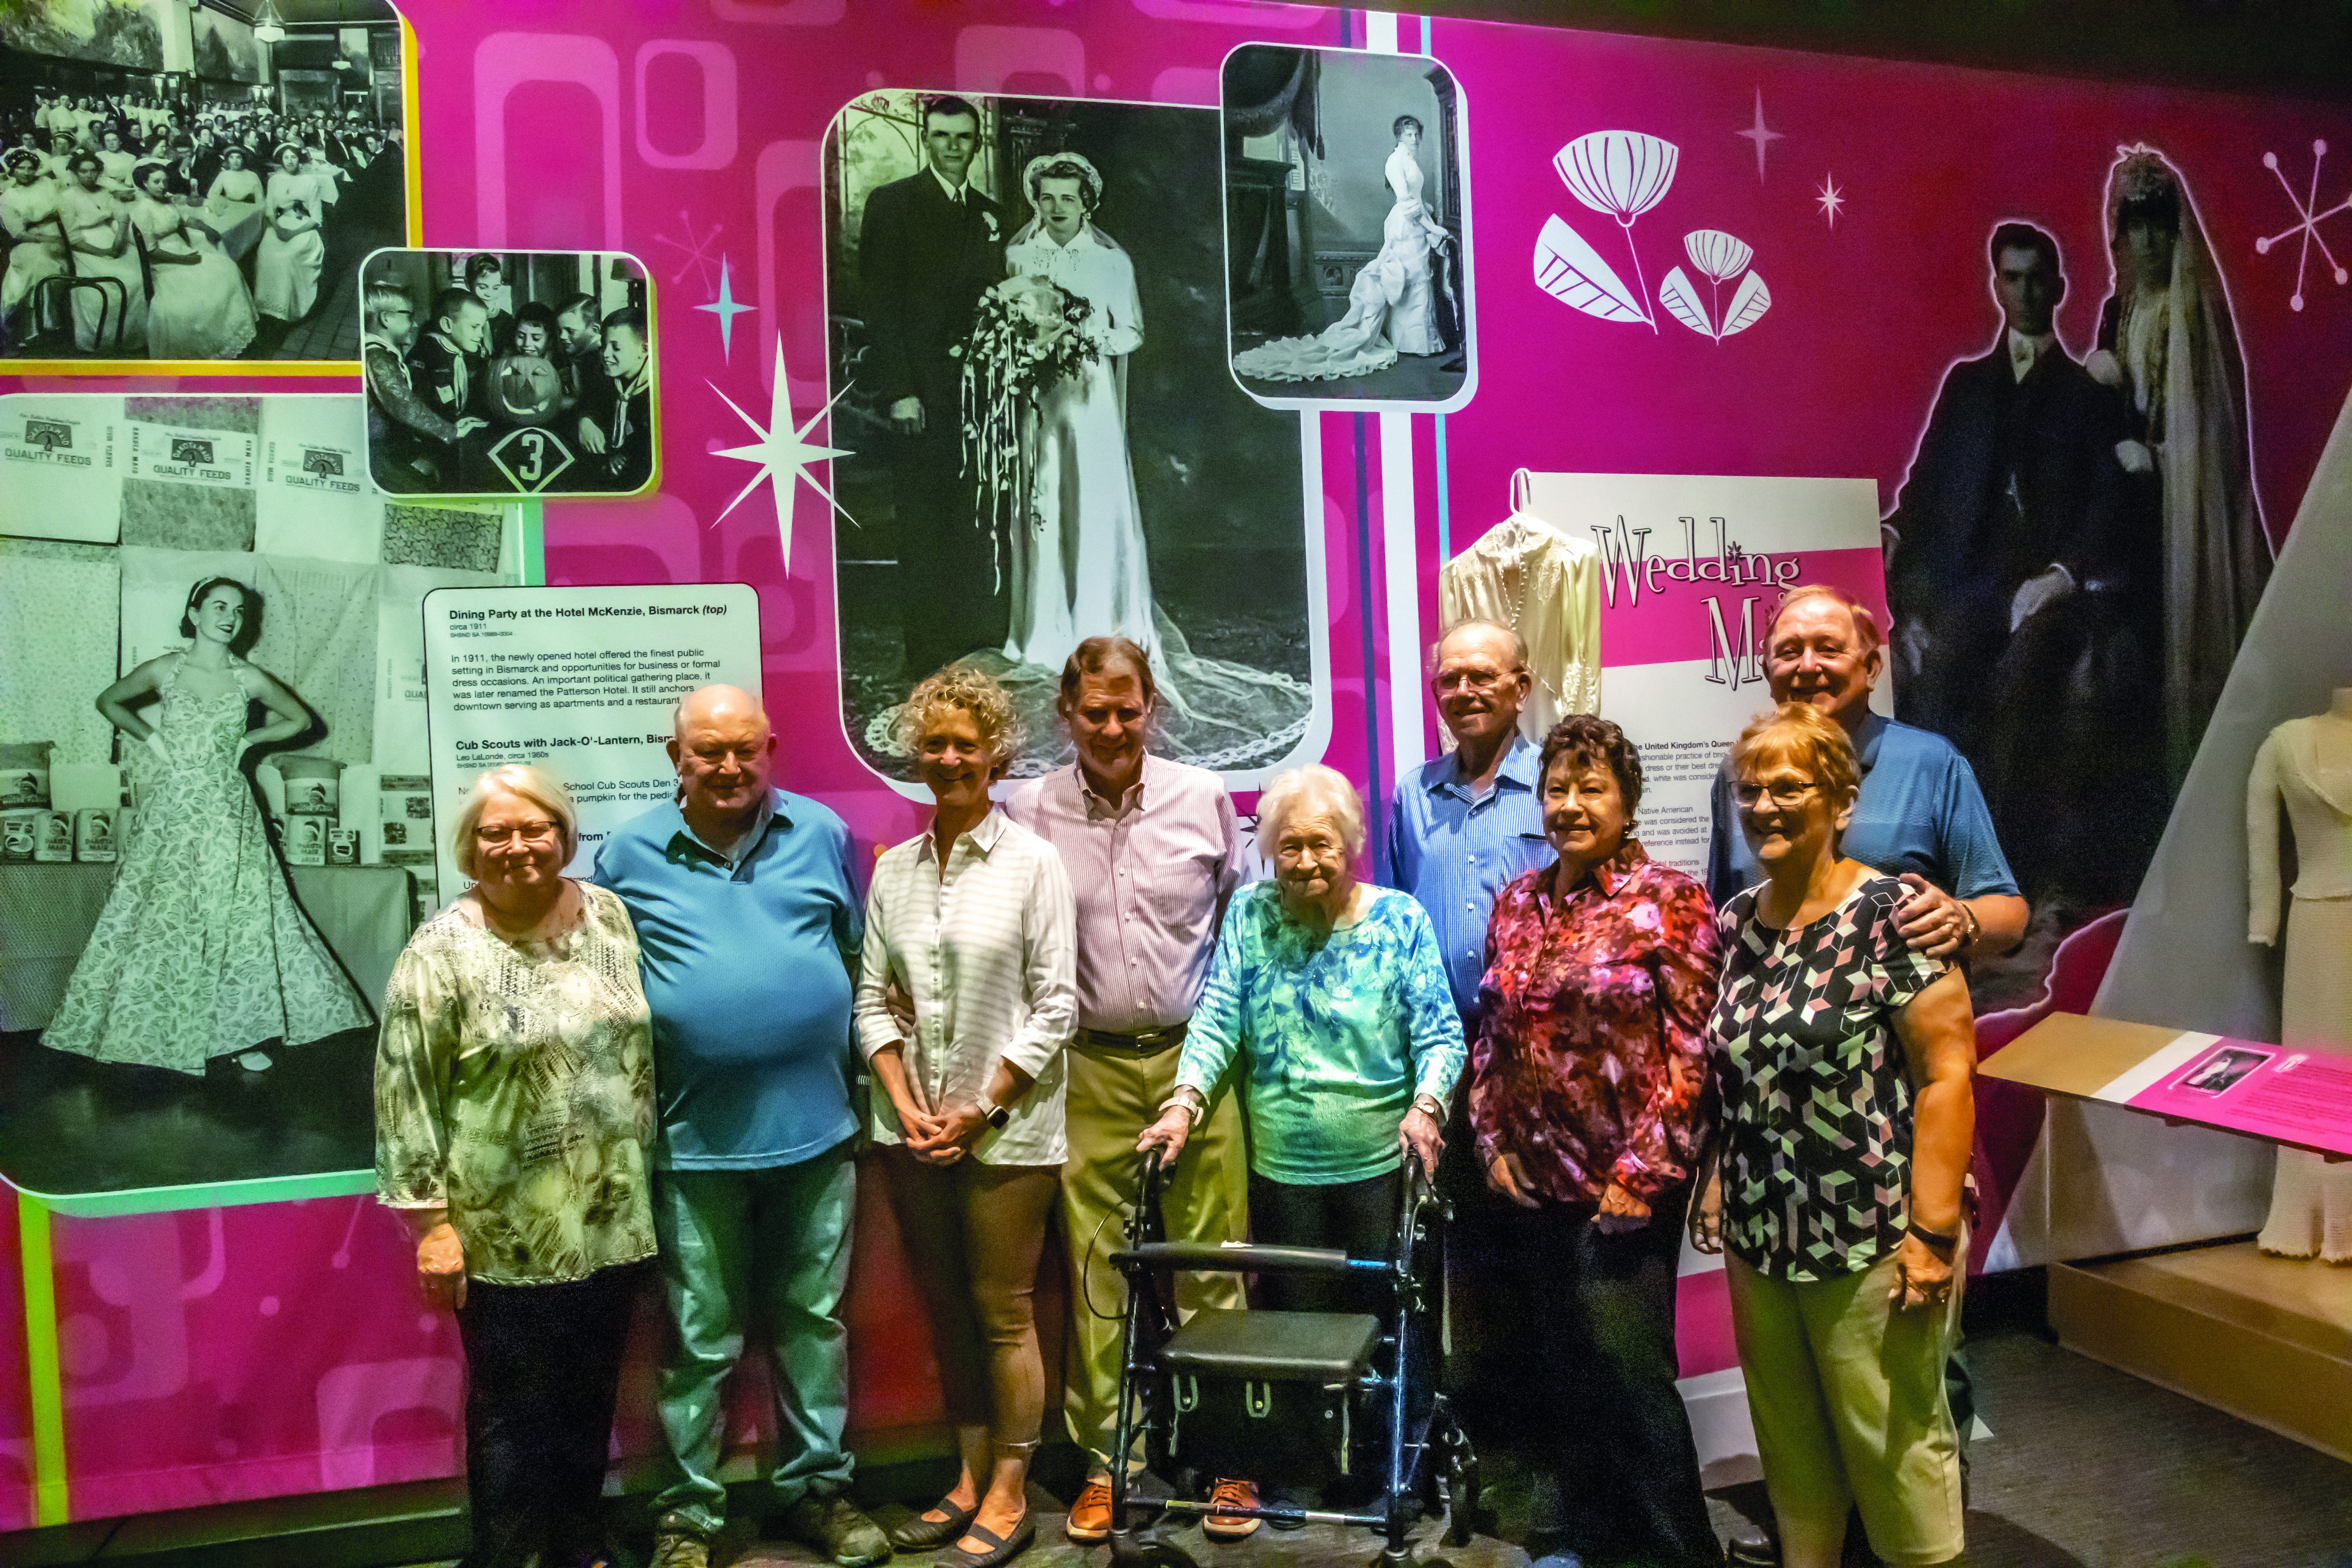 A old woman with a walker stands with four of her children and their spouses in front of her wedding gown and a photo of her and her late husband on their wedding day that are on display for a museum exhibit.